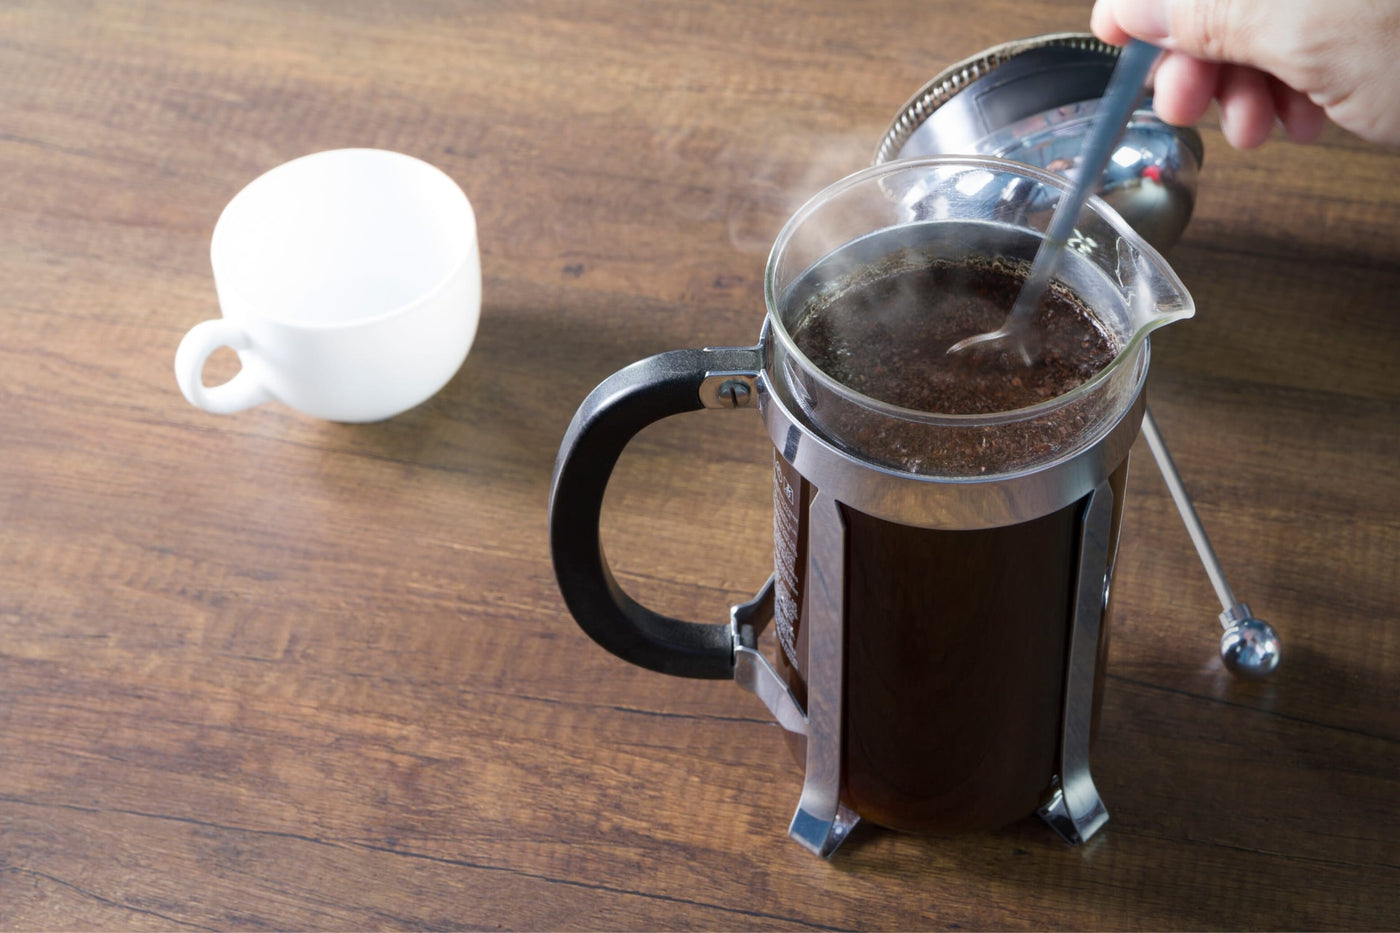 Learn how to brew coffee using a french press